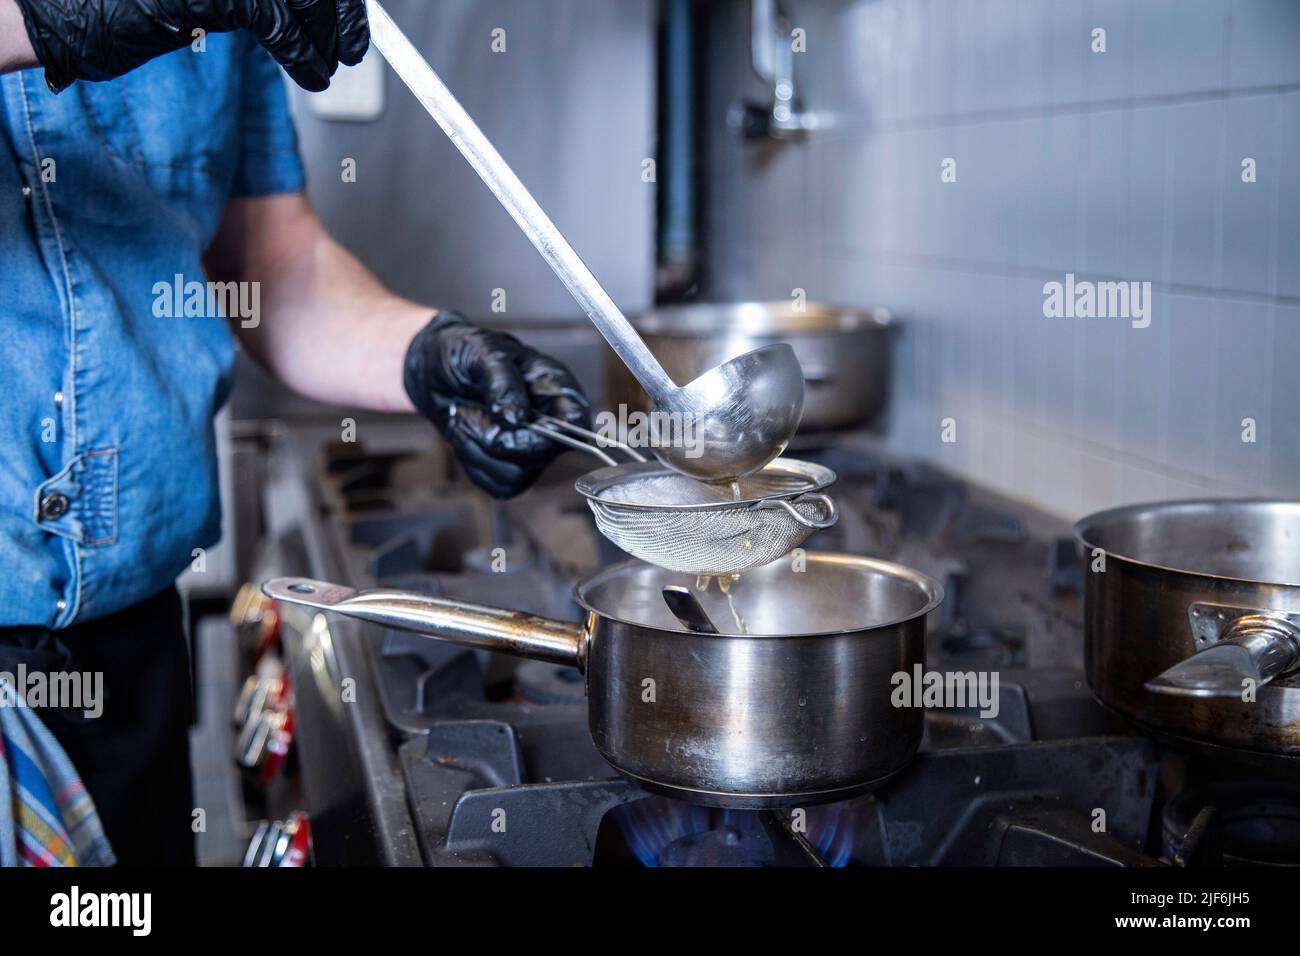 Chef separating water from rice using strainer in commercial kitchen Stock Photo